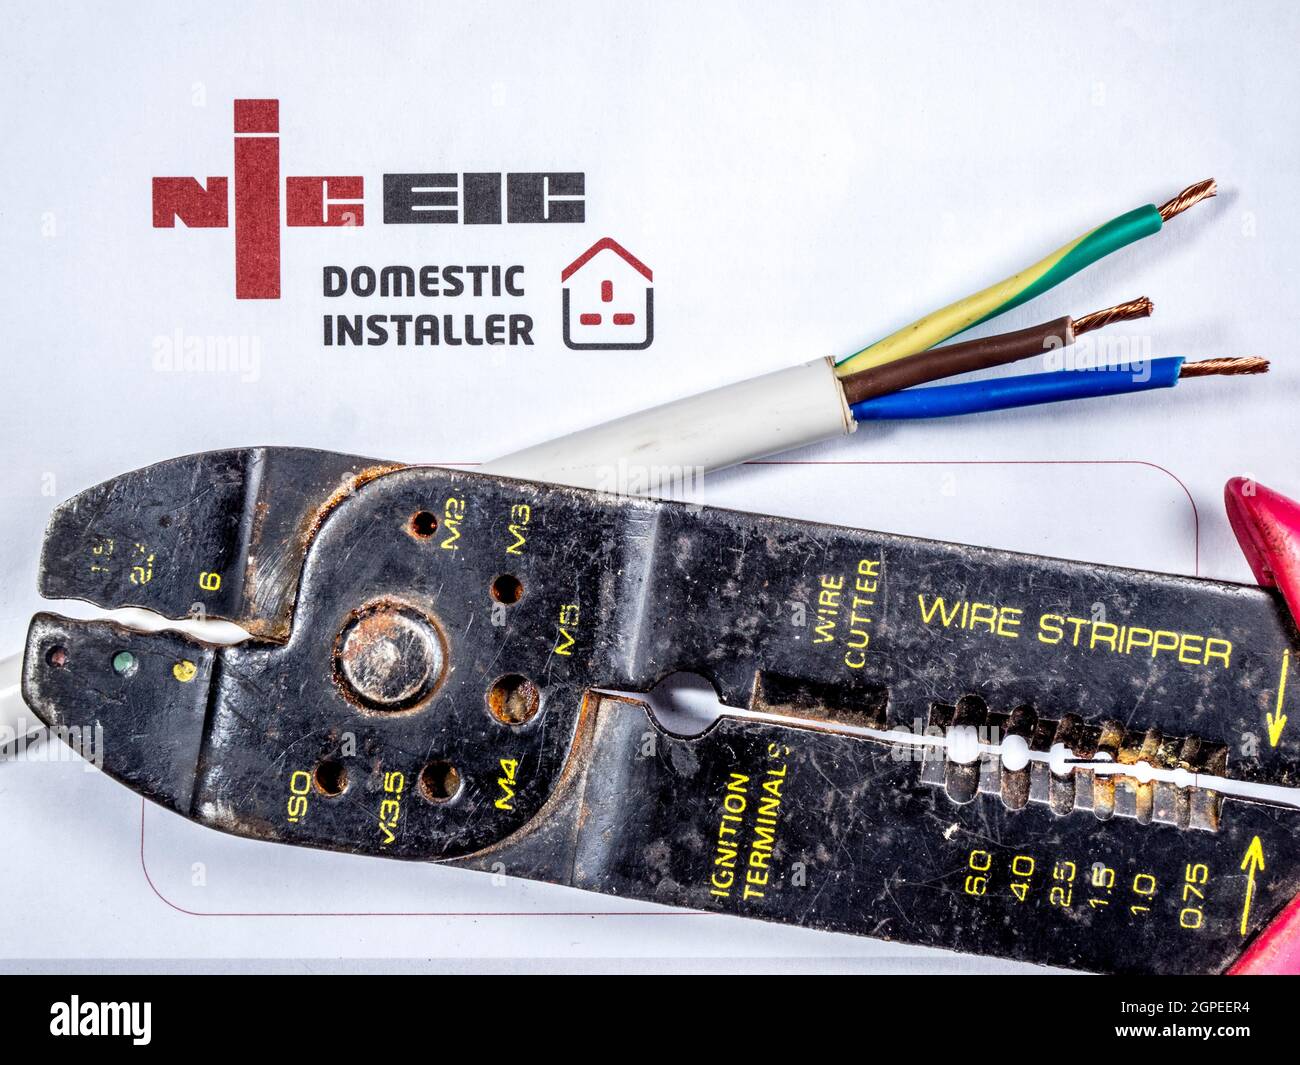 NICEIC logo – National Inspection Council for Electrical Installation Contracting - with wire strippers and a cable with brown, green and blue wires. Stock Photo